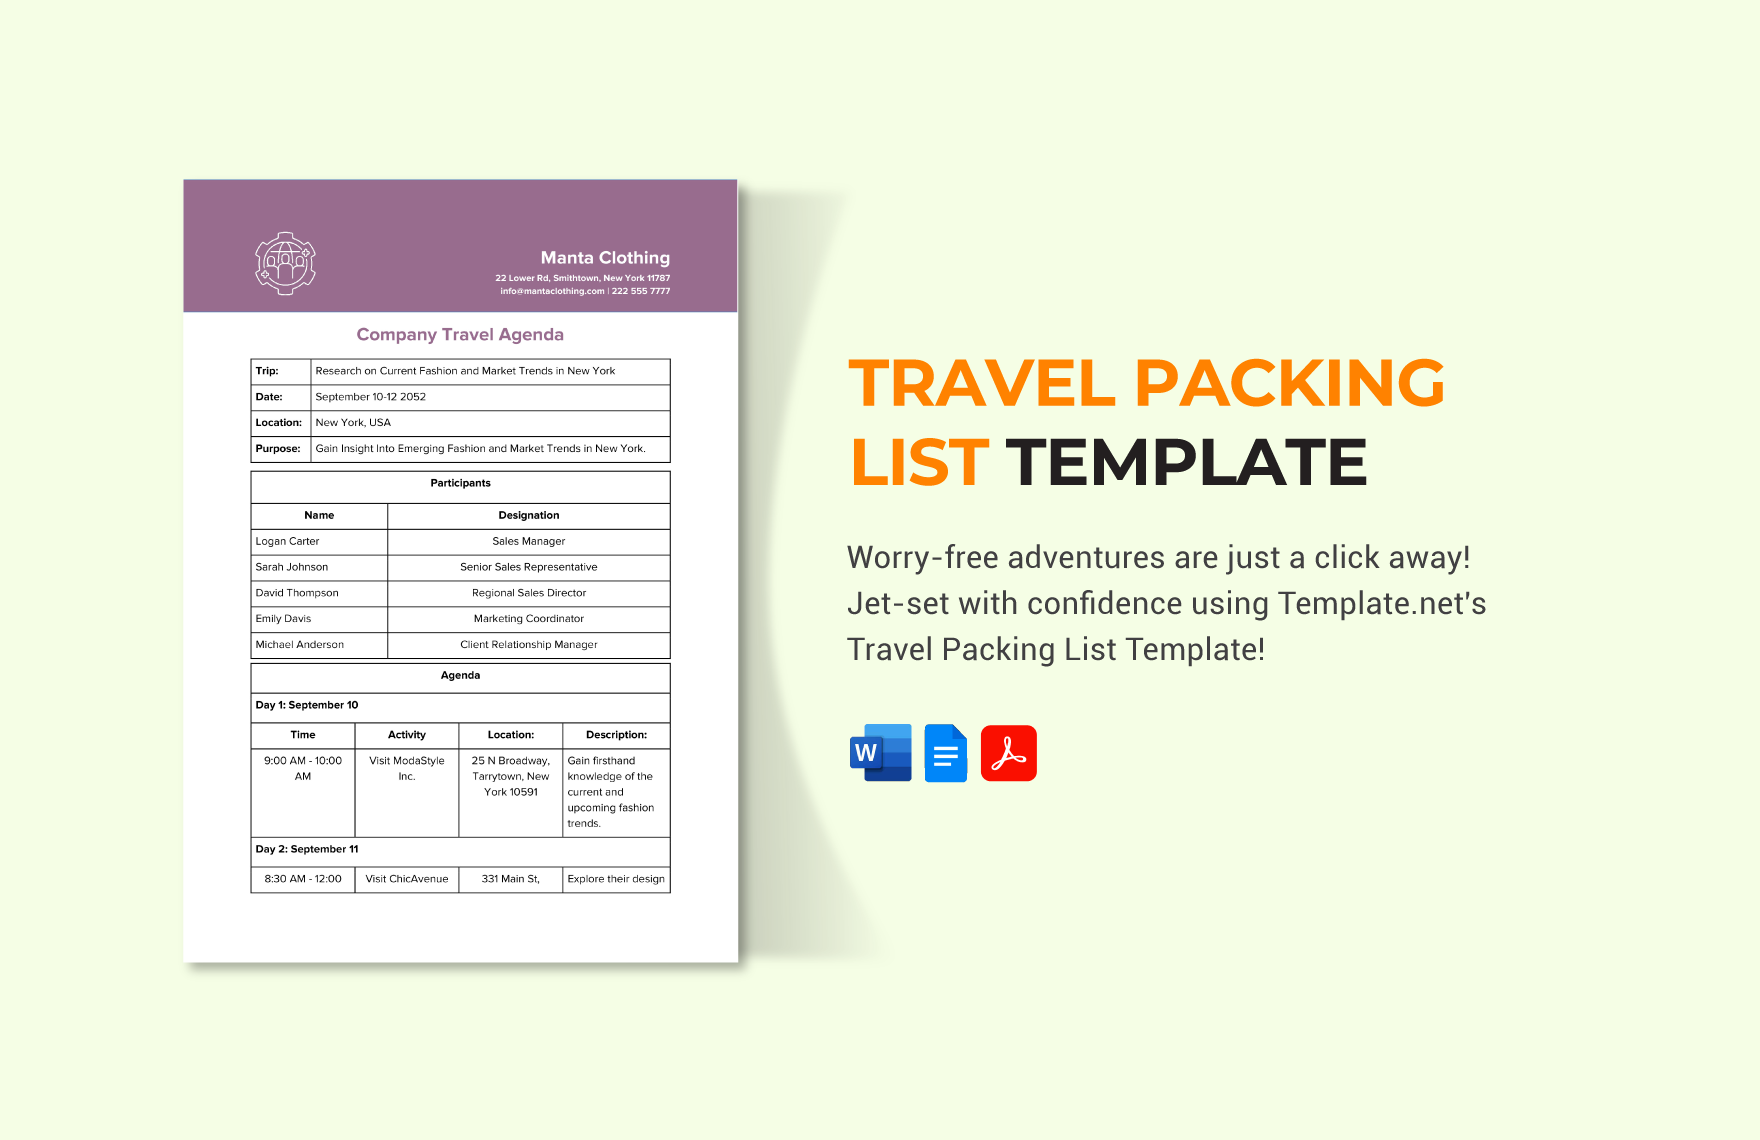 Travel Packing List Template in Word, Google Docs, PDF, Apple Pages